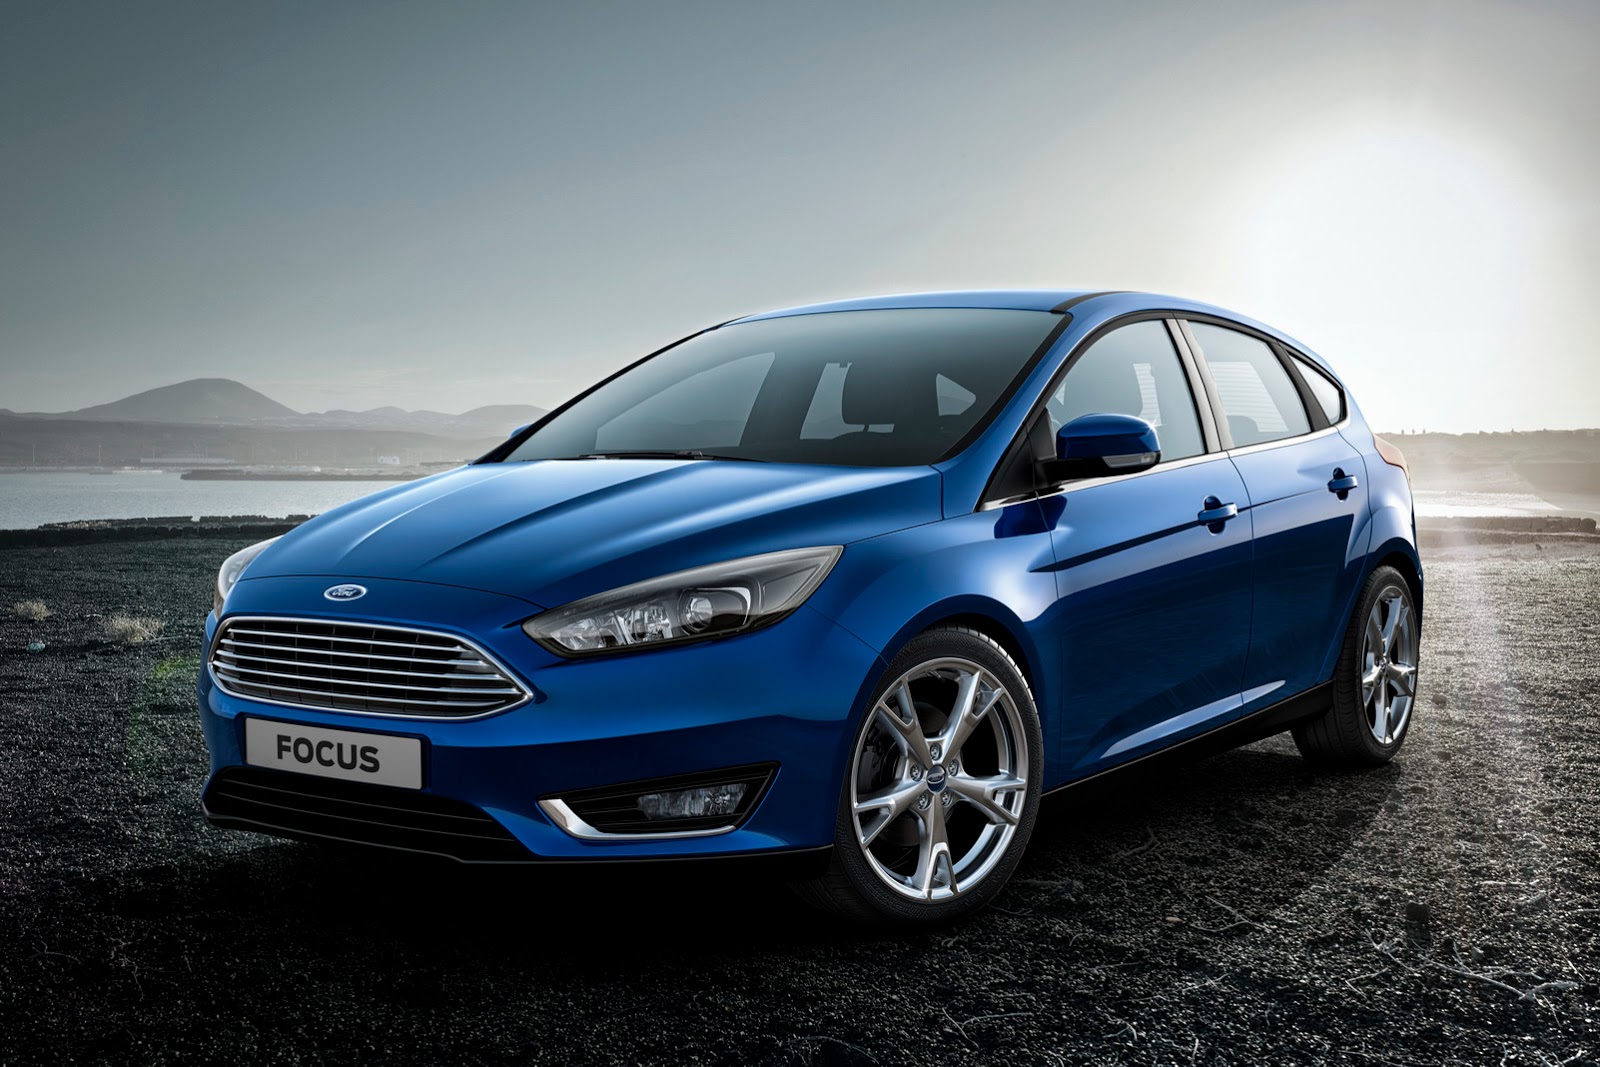 New Ford Focus Gets A Sharper Grille And Cockpit Like